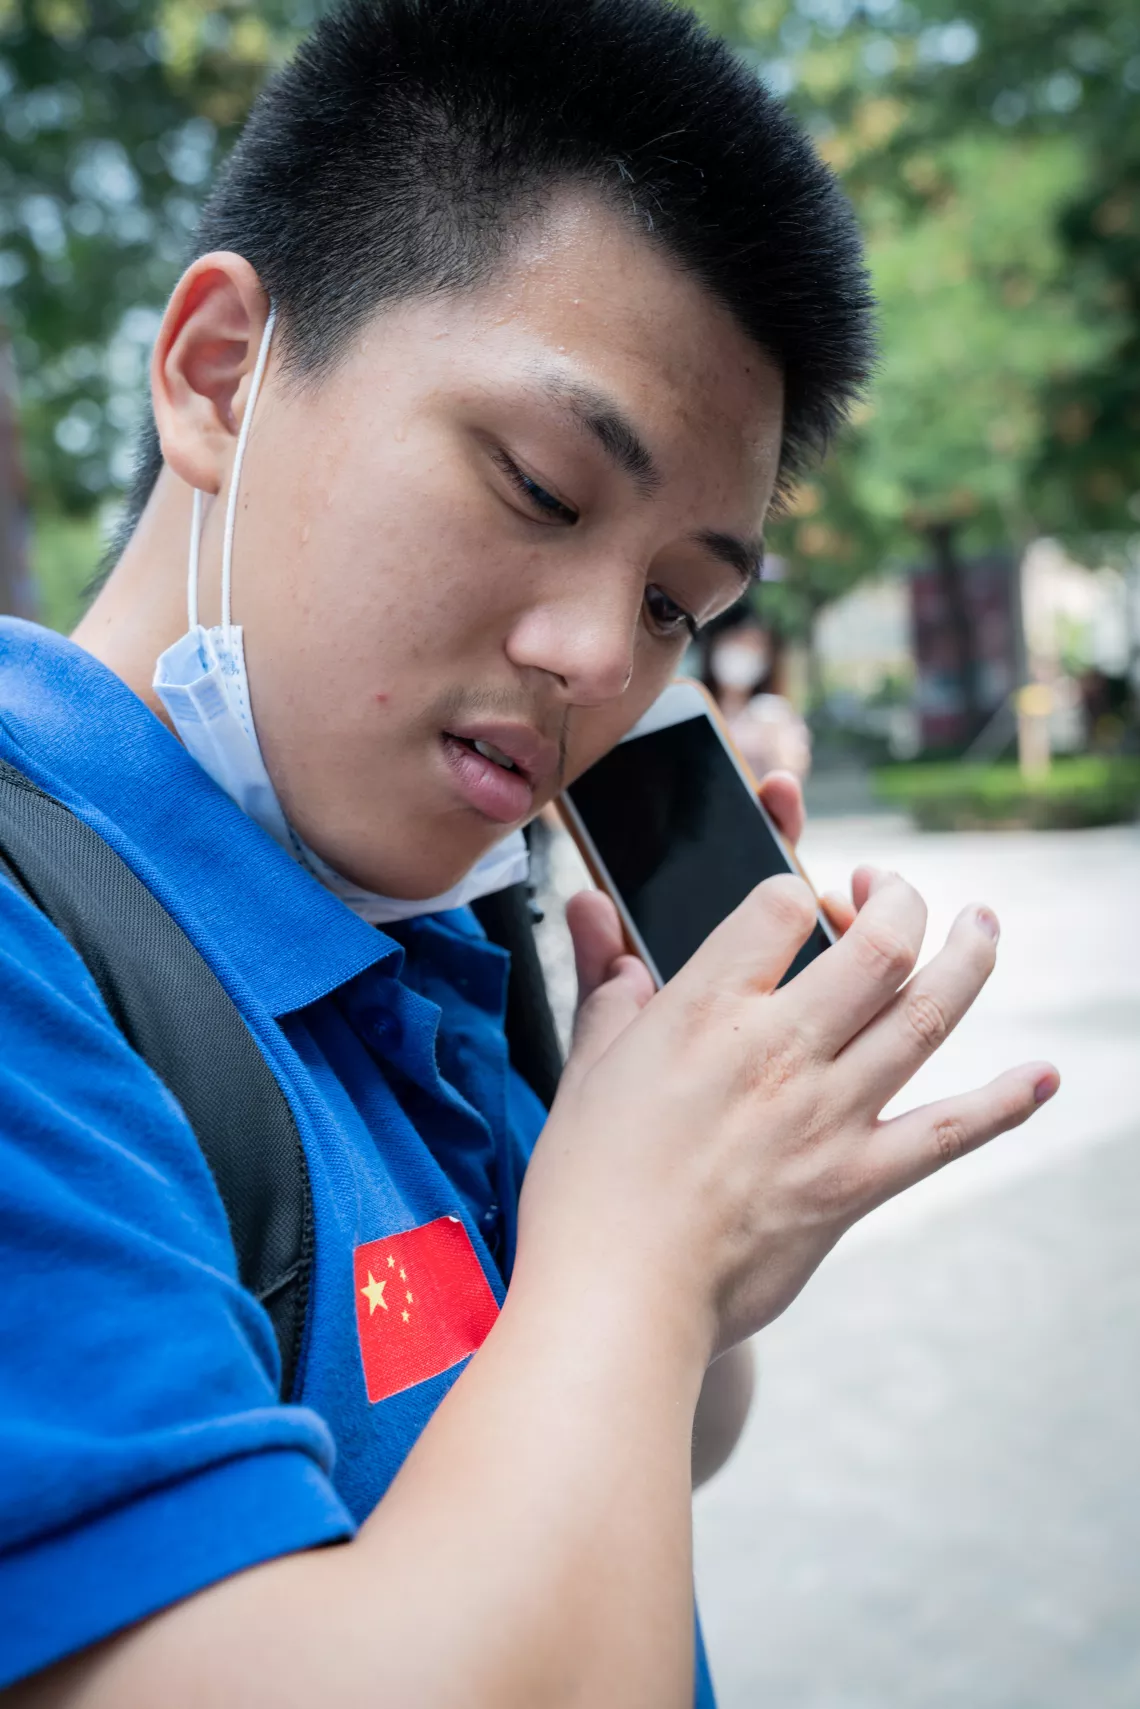 Zhao Chen uses the accessibility feature on his cell phone to read what's on the screen in Beijing, China, on 20 July, 2020.